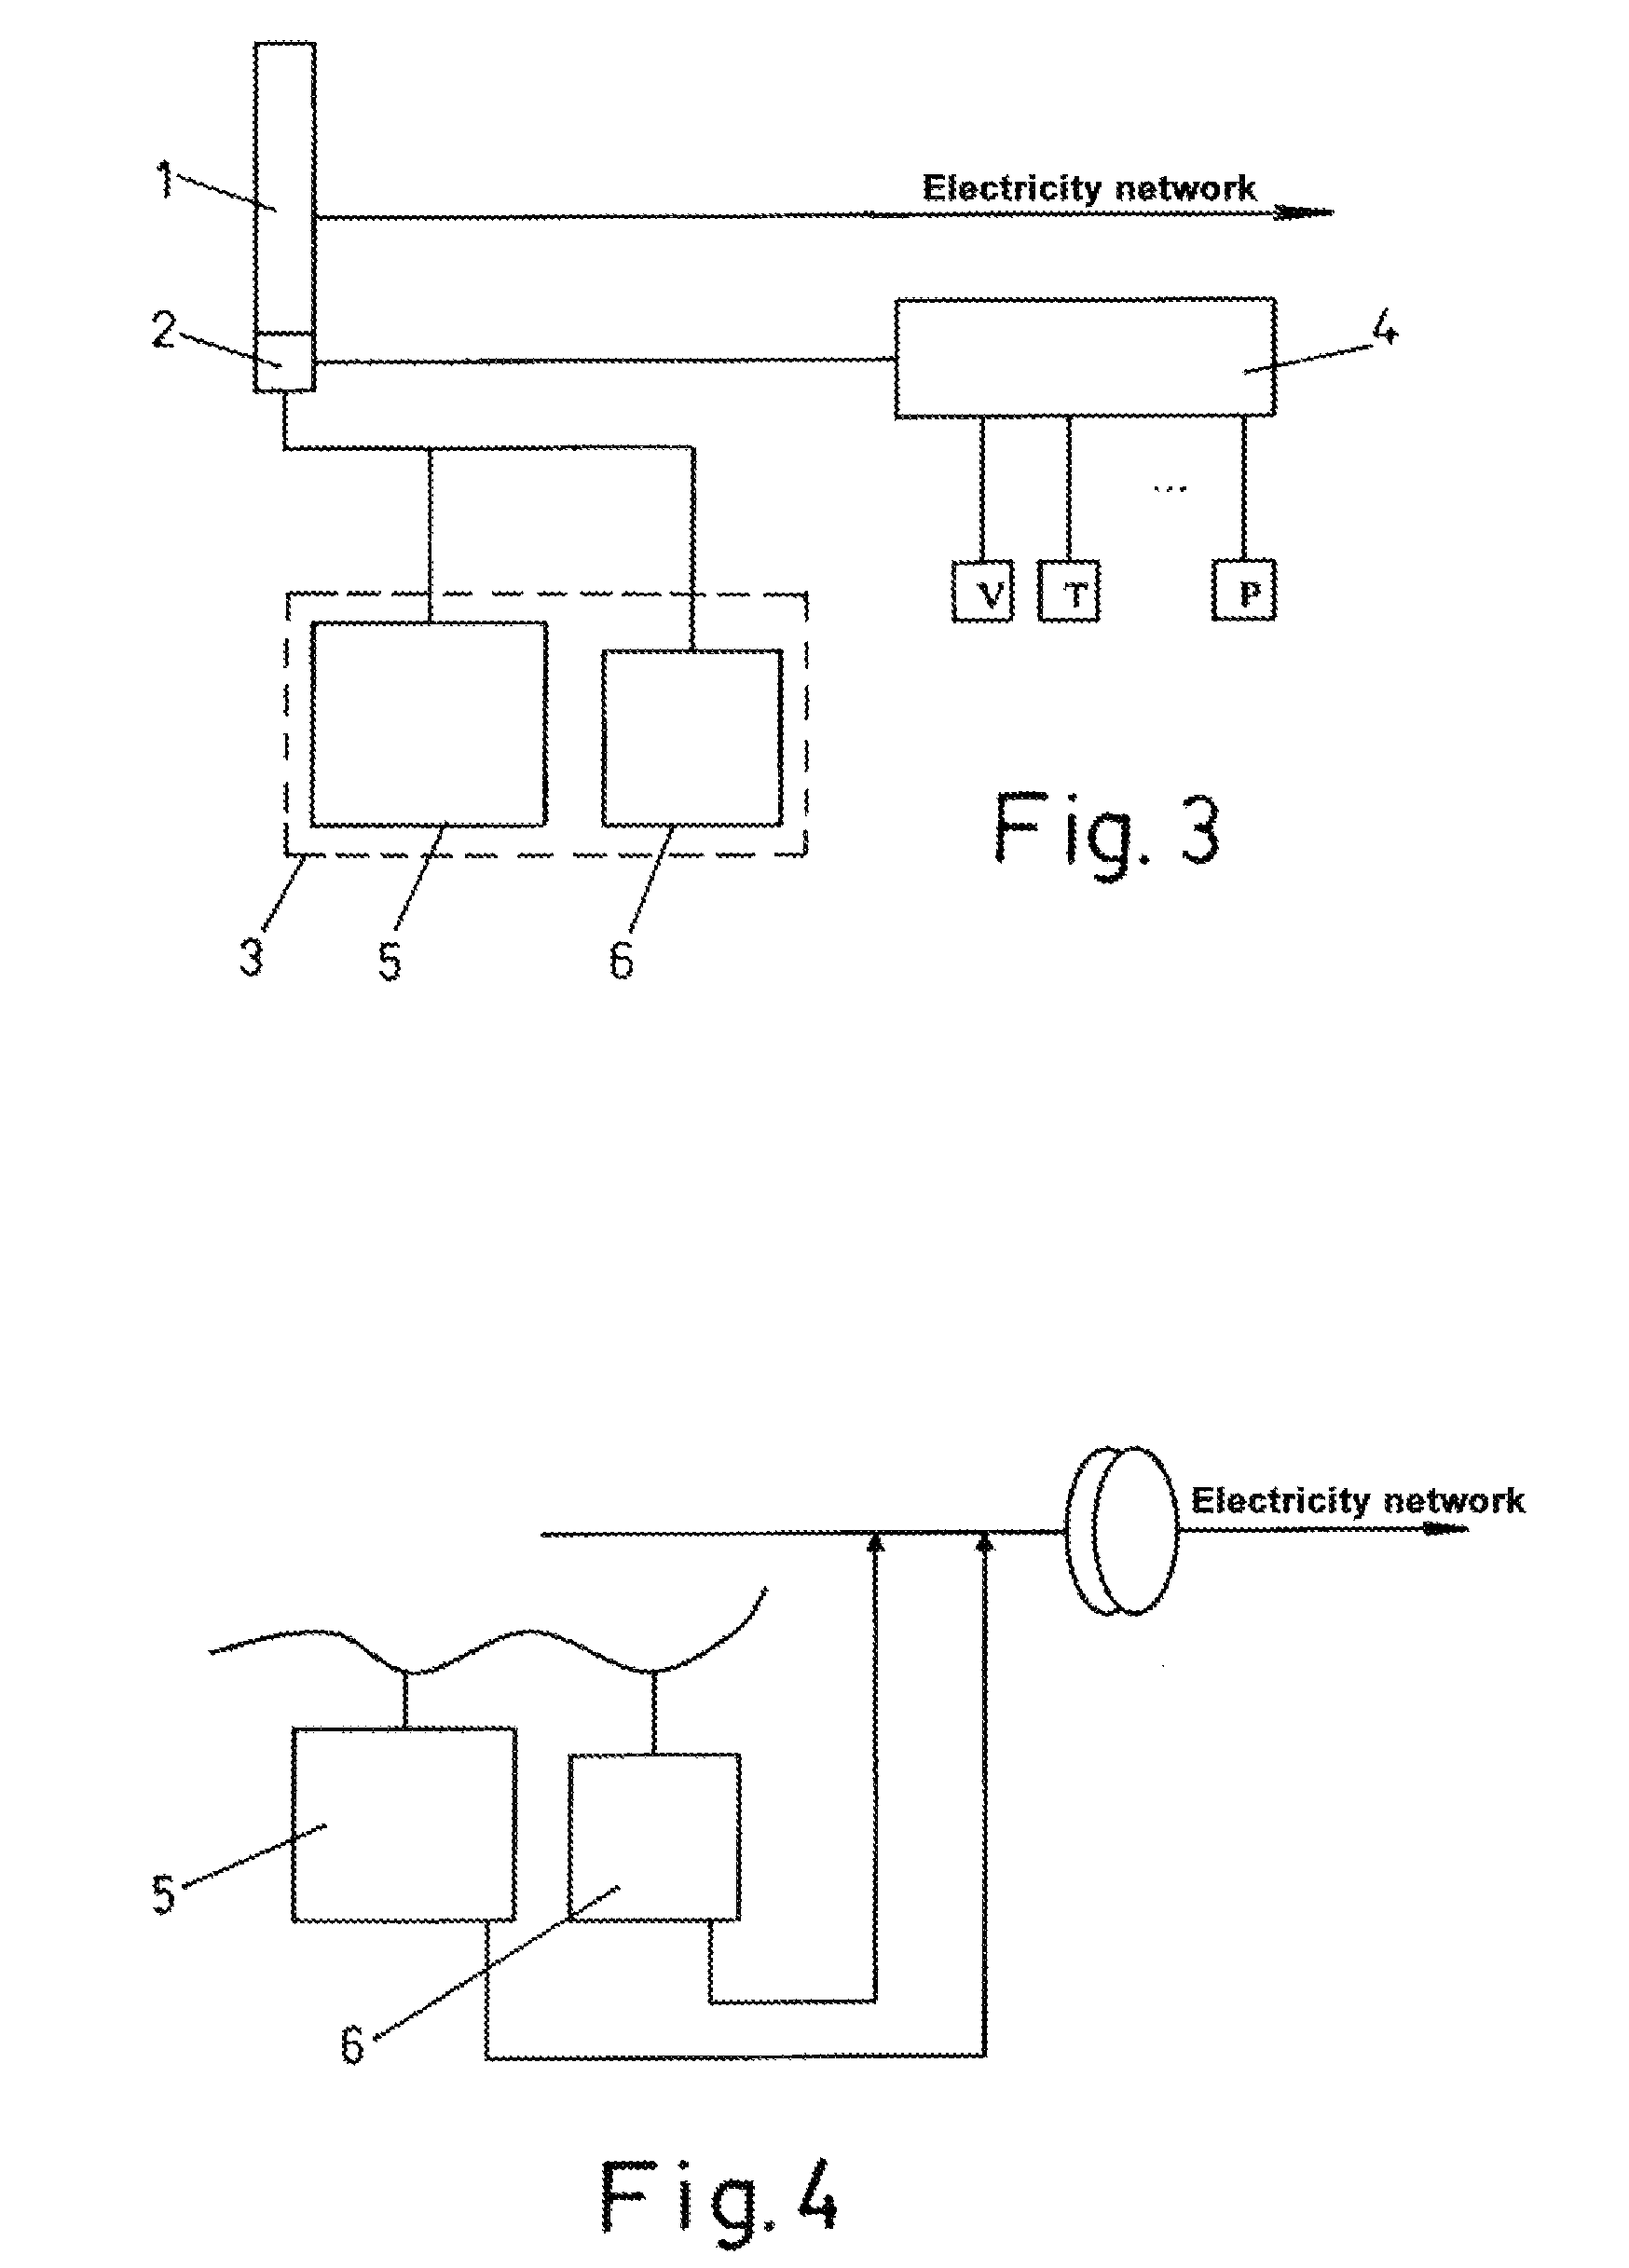 System for producing electric energy and hydrogen